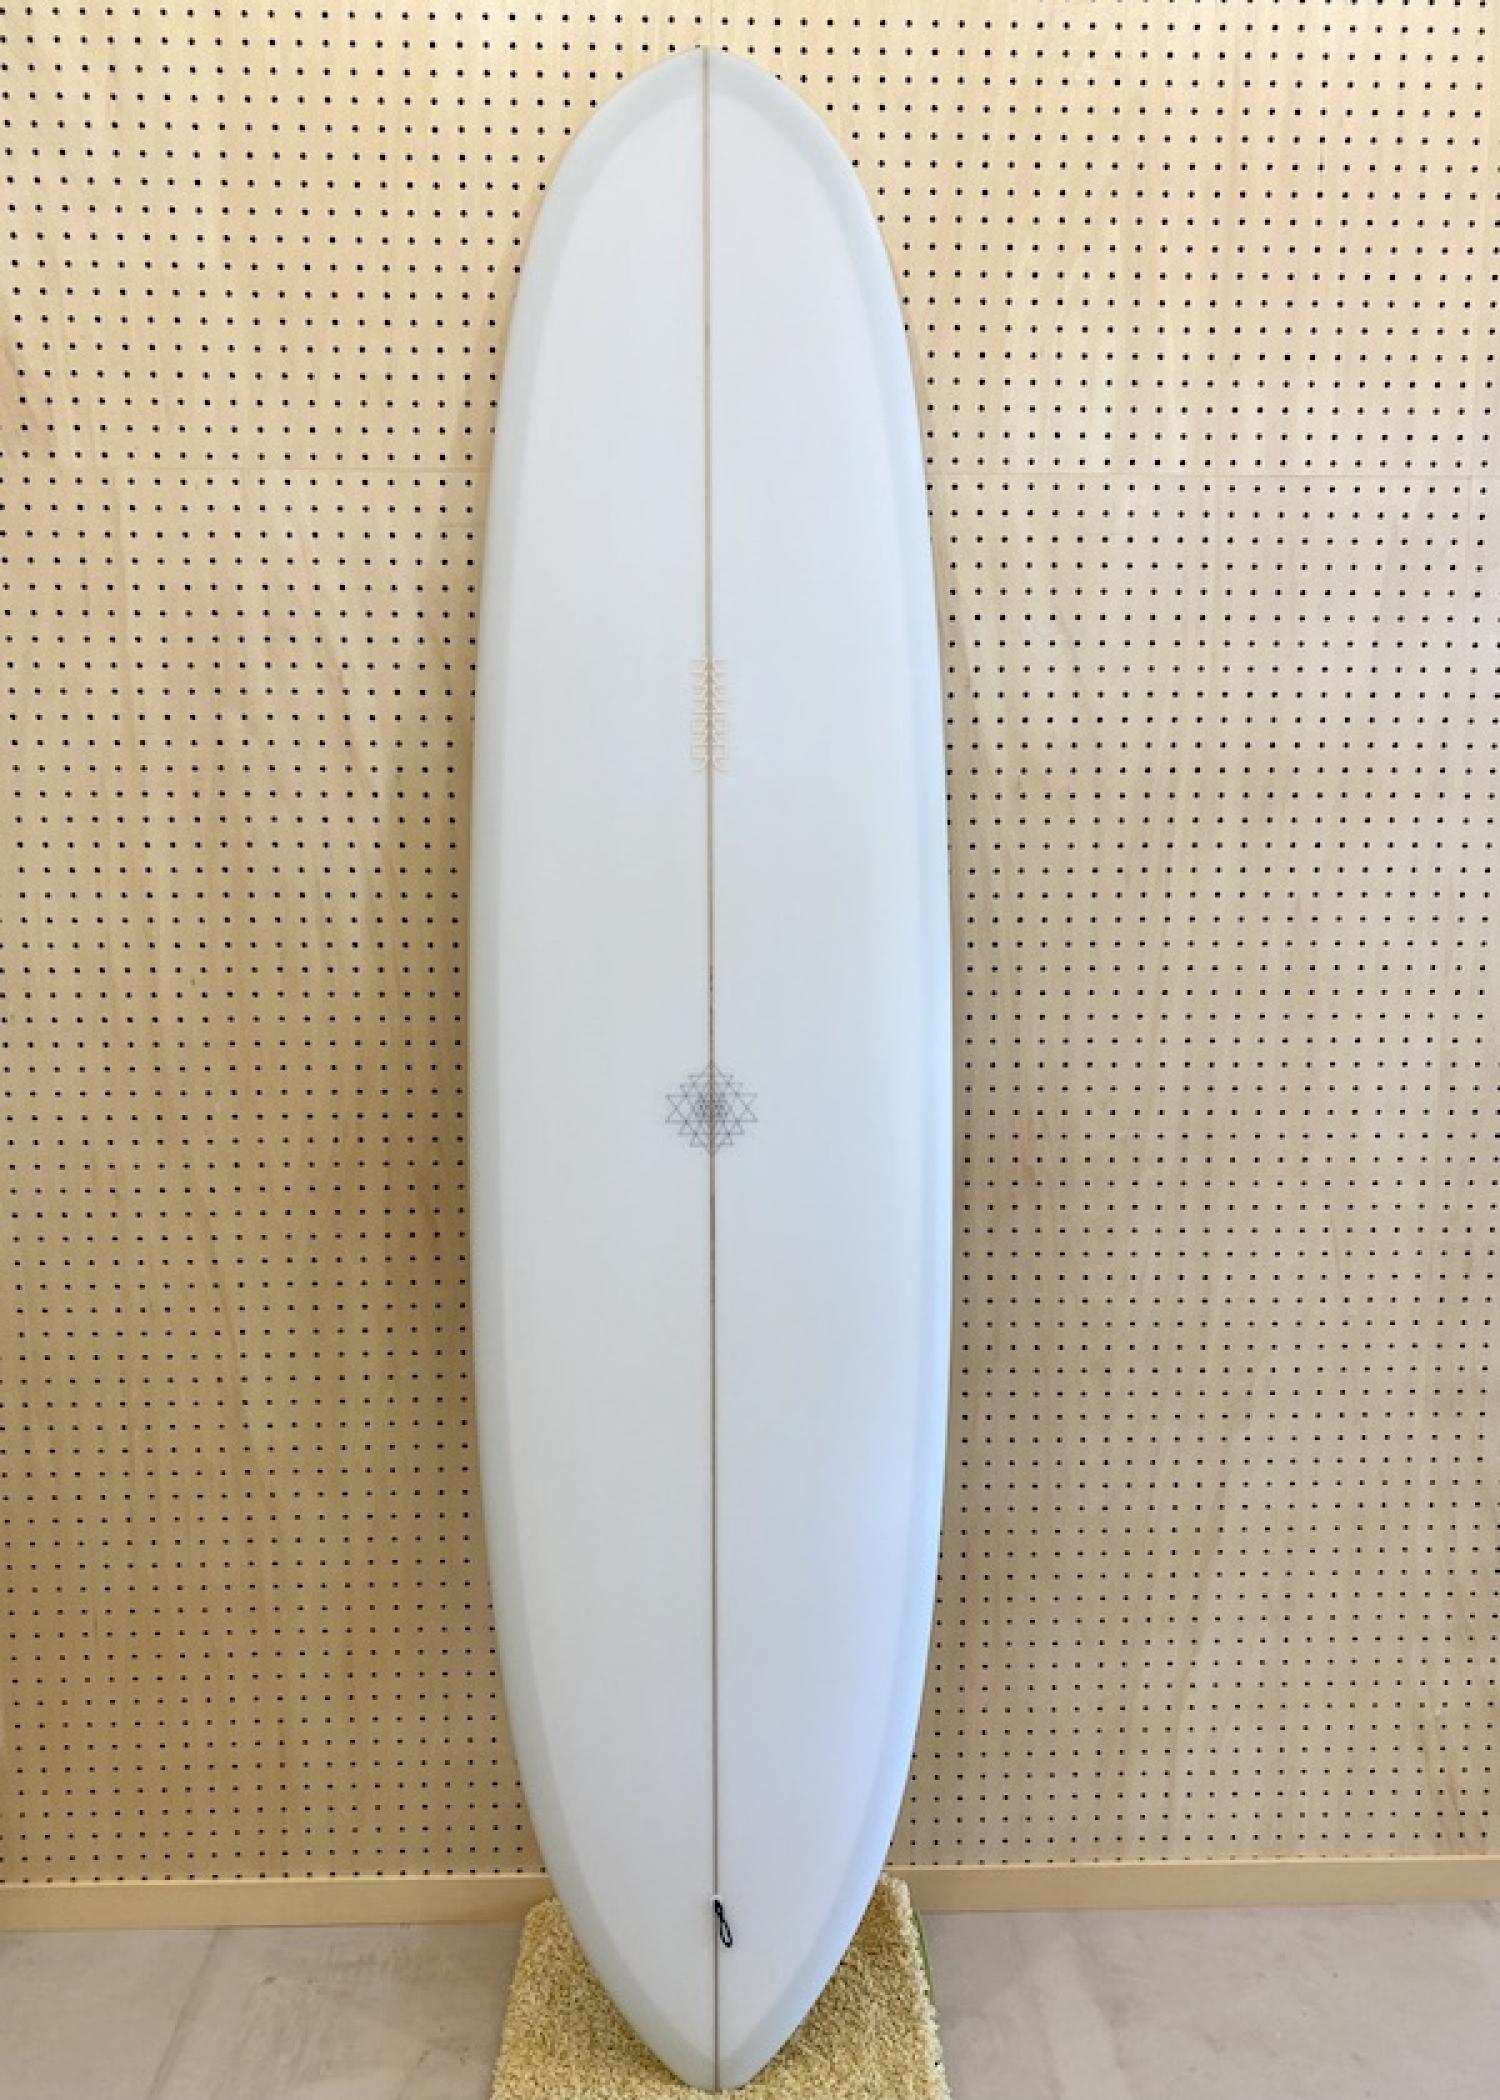 USED BOARDS （STRETCH SURFBOARDS 「QUAD FISH 5'8